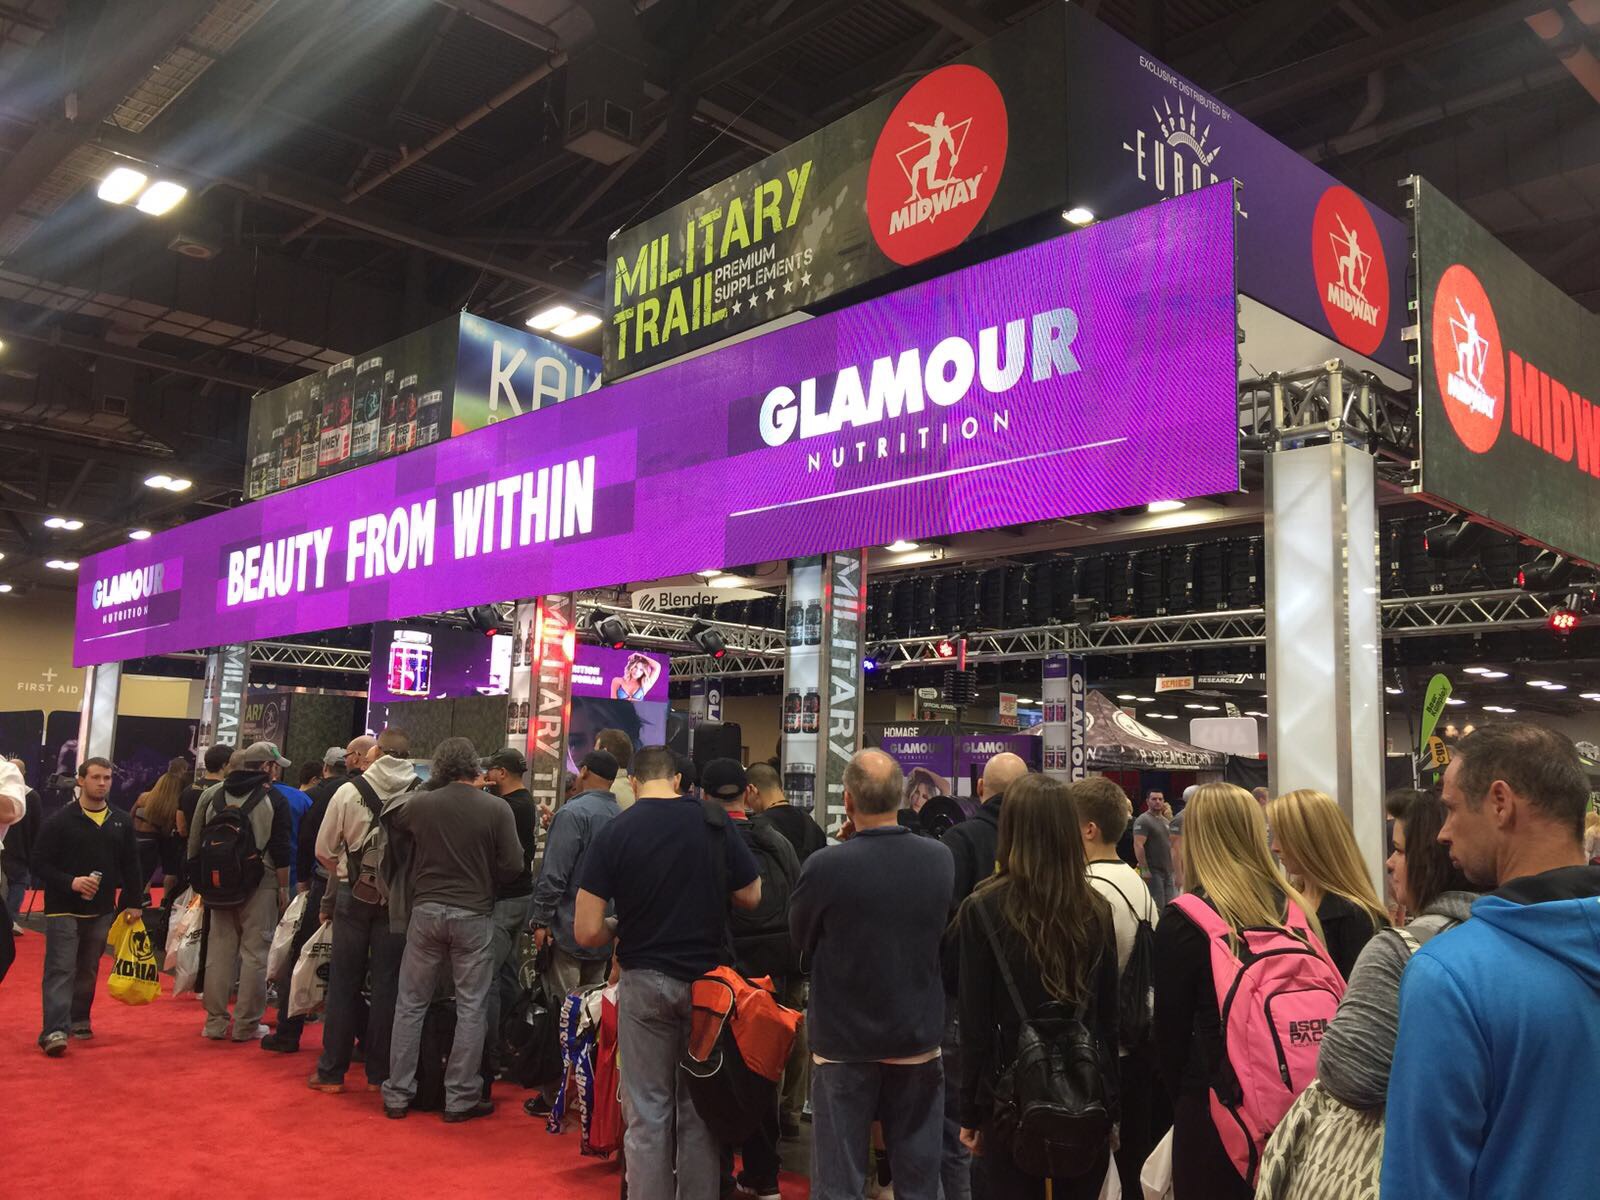 People lining up outside Glamour Nutrition Booth to check<br /> out the products and giveaways.